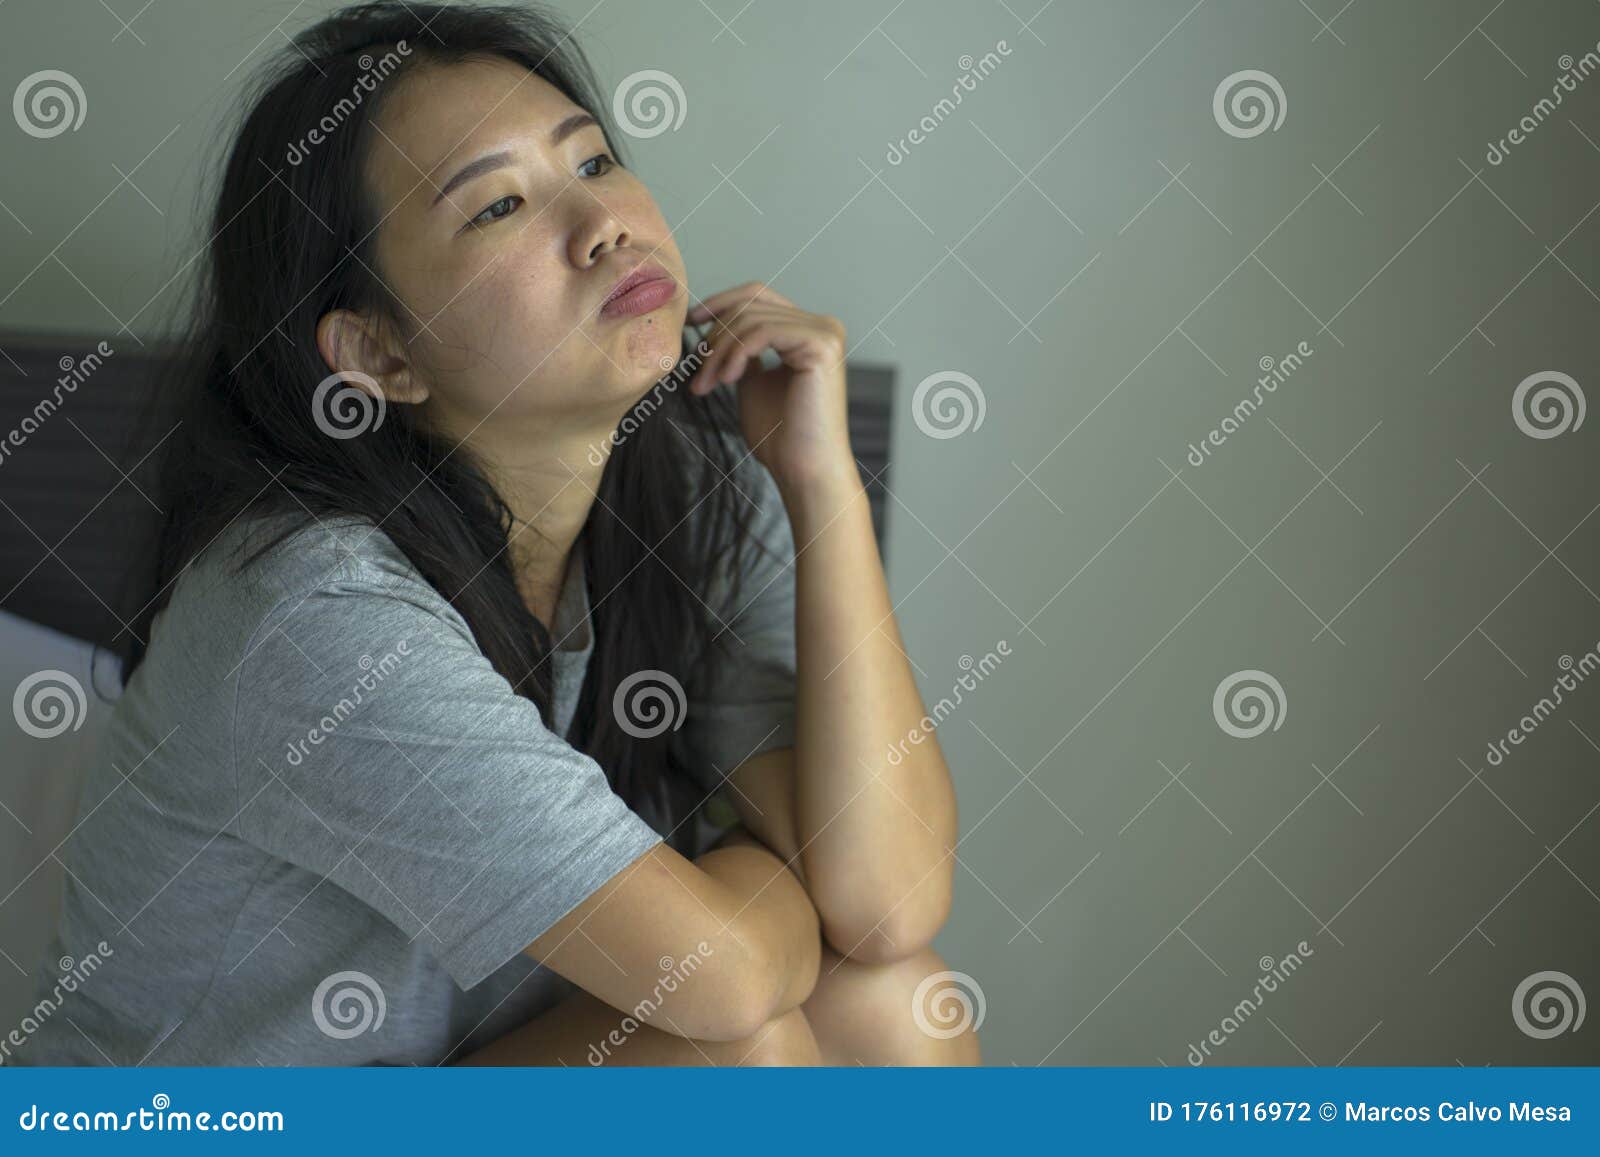 Lifestyle Indoors Portrait Of Young Attractive Sad And Depressed Asia